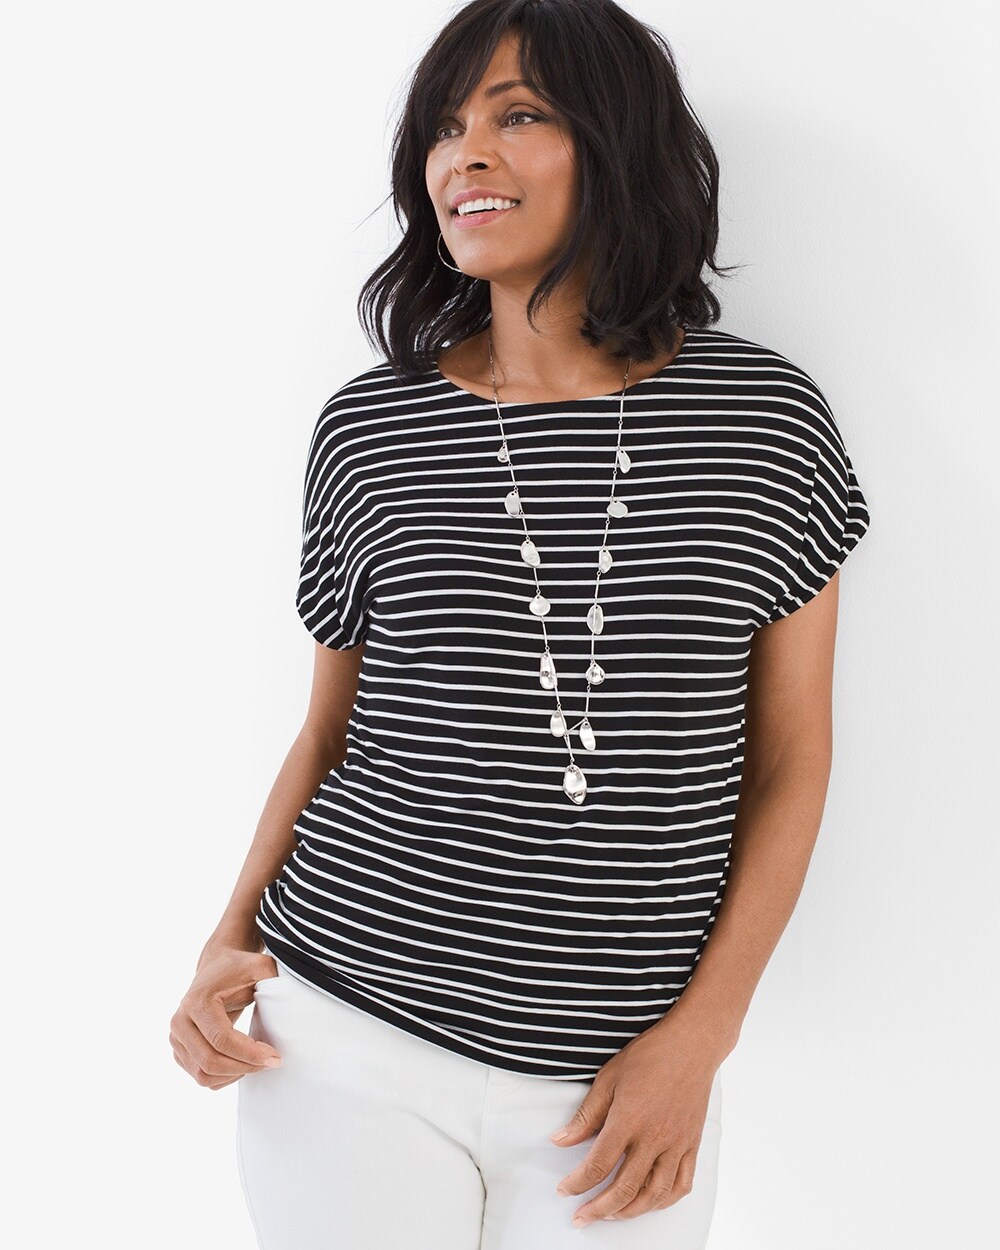 Reversible Solid-Striped Tee